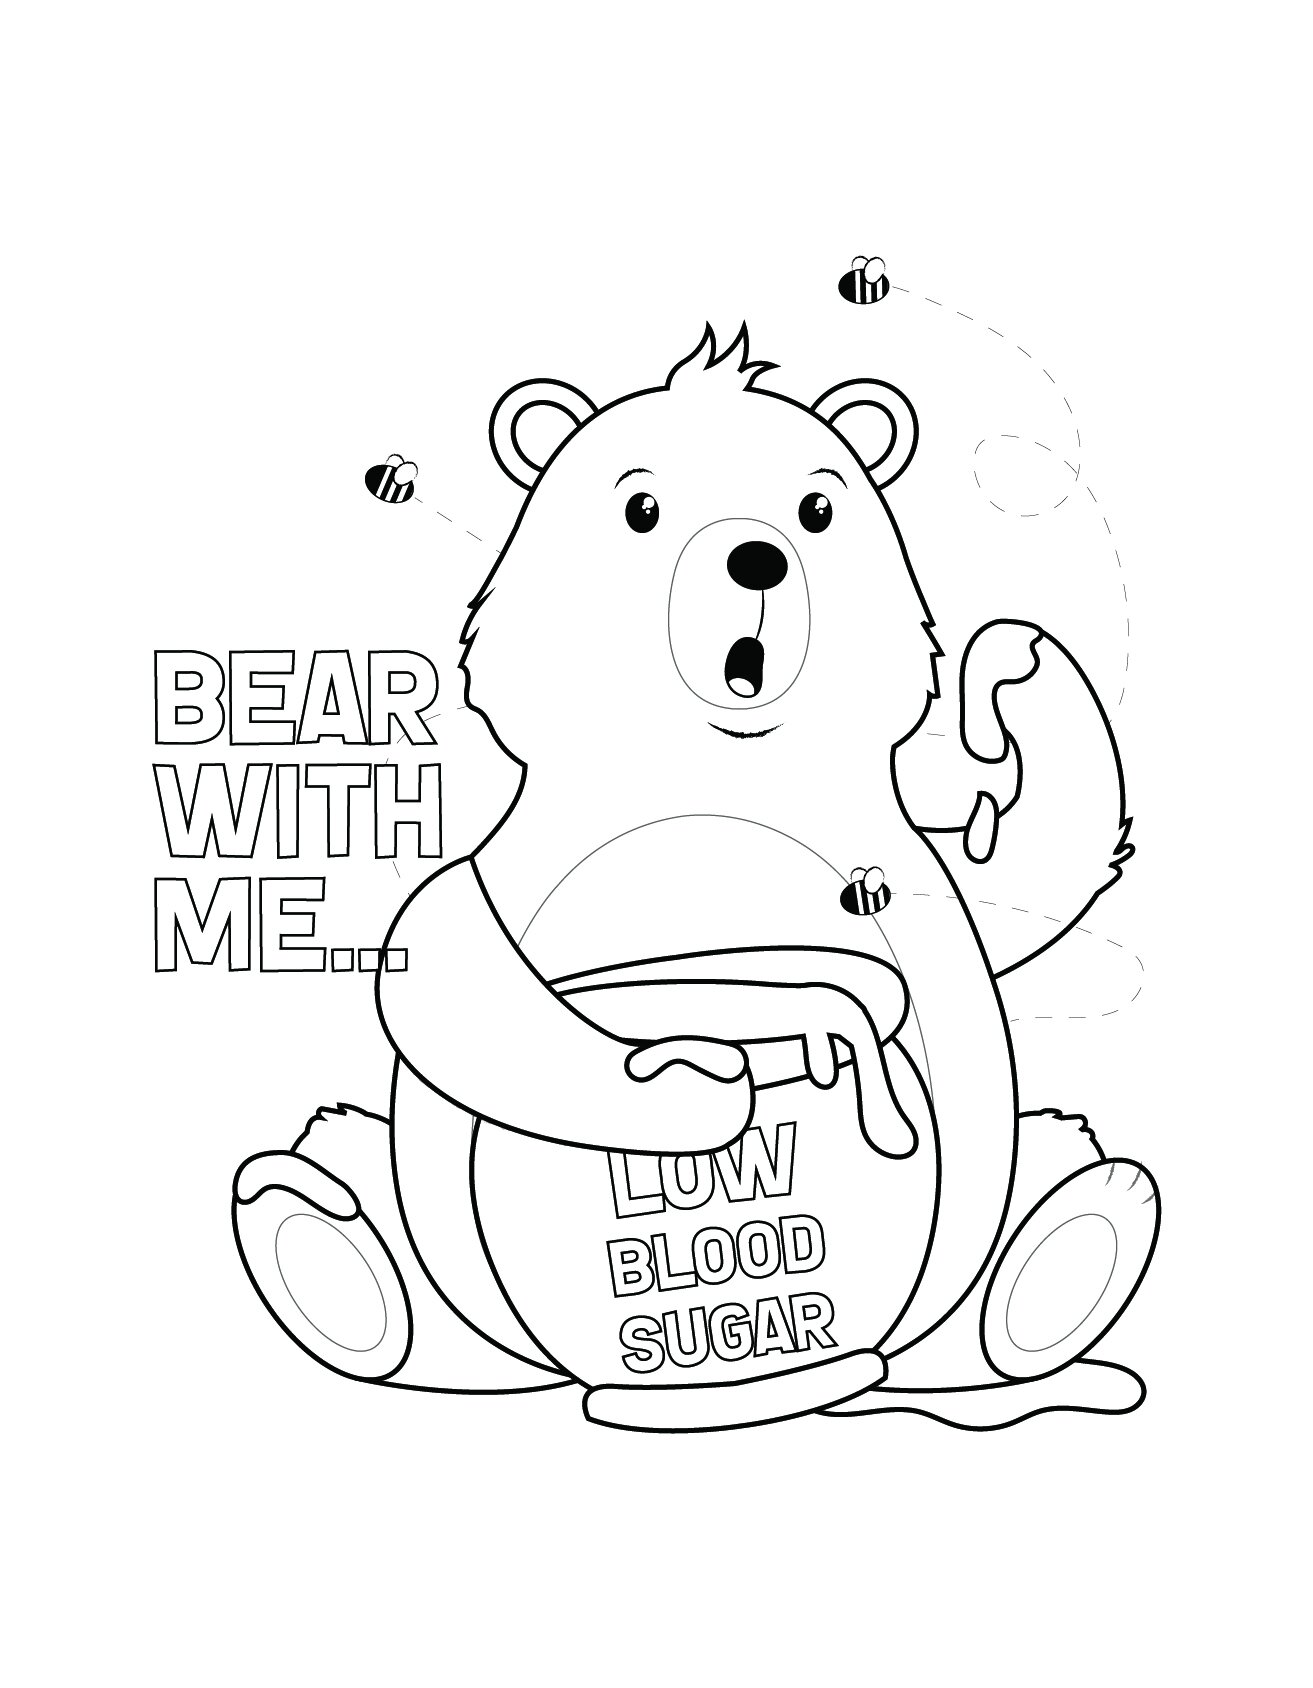 Get Well Soon Teddy Bear Coloring Pages